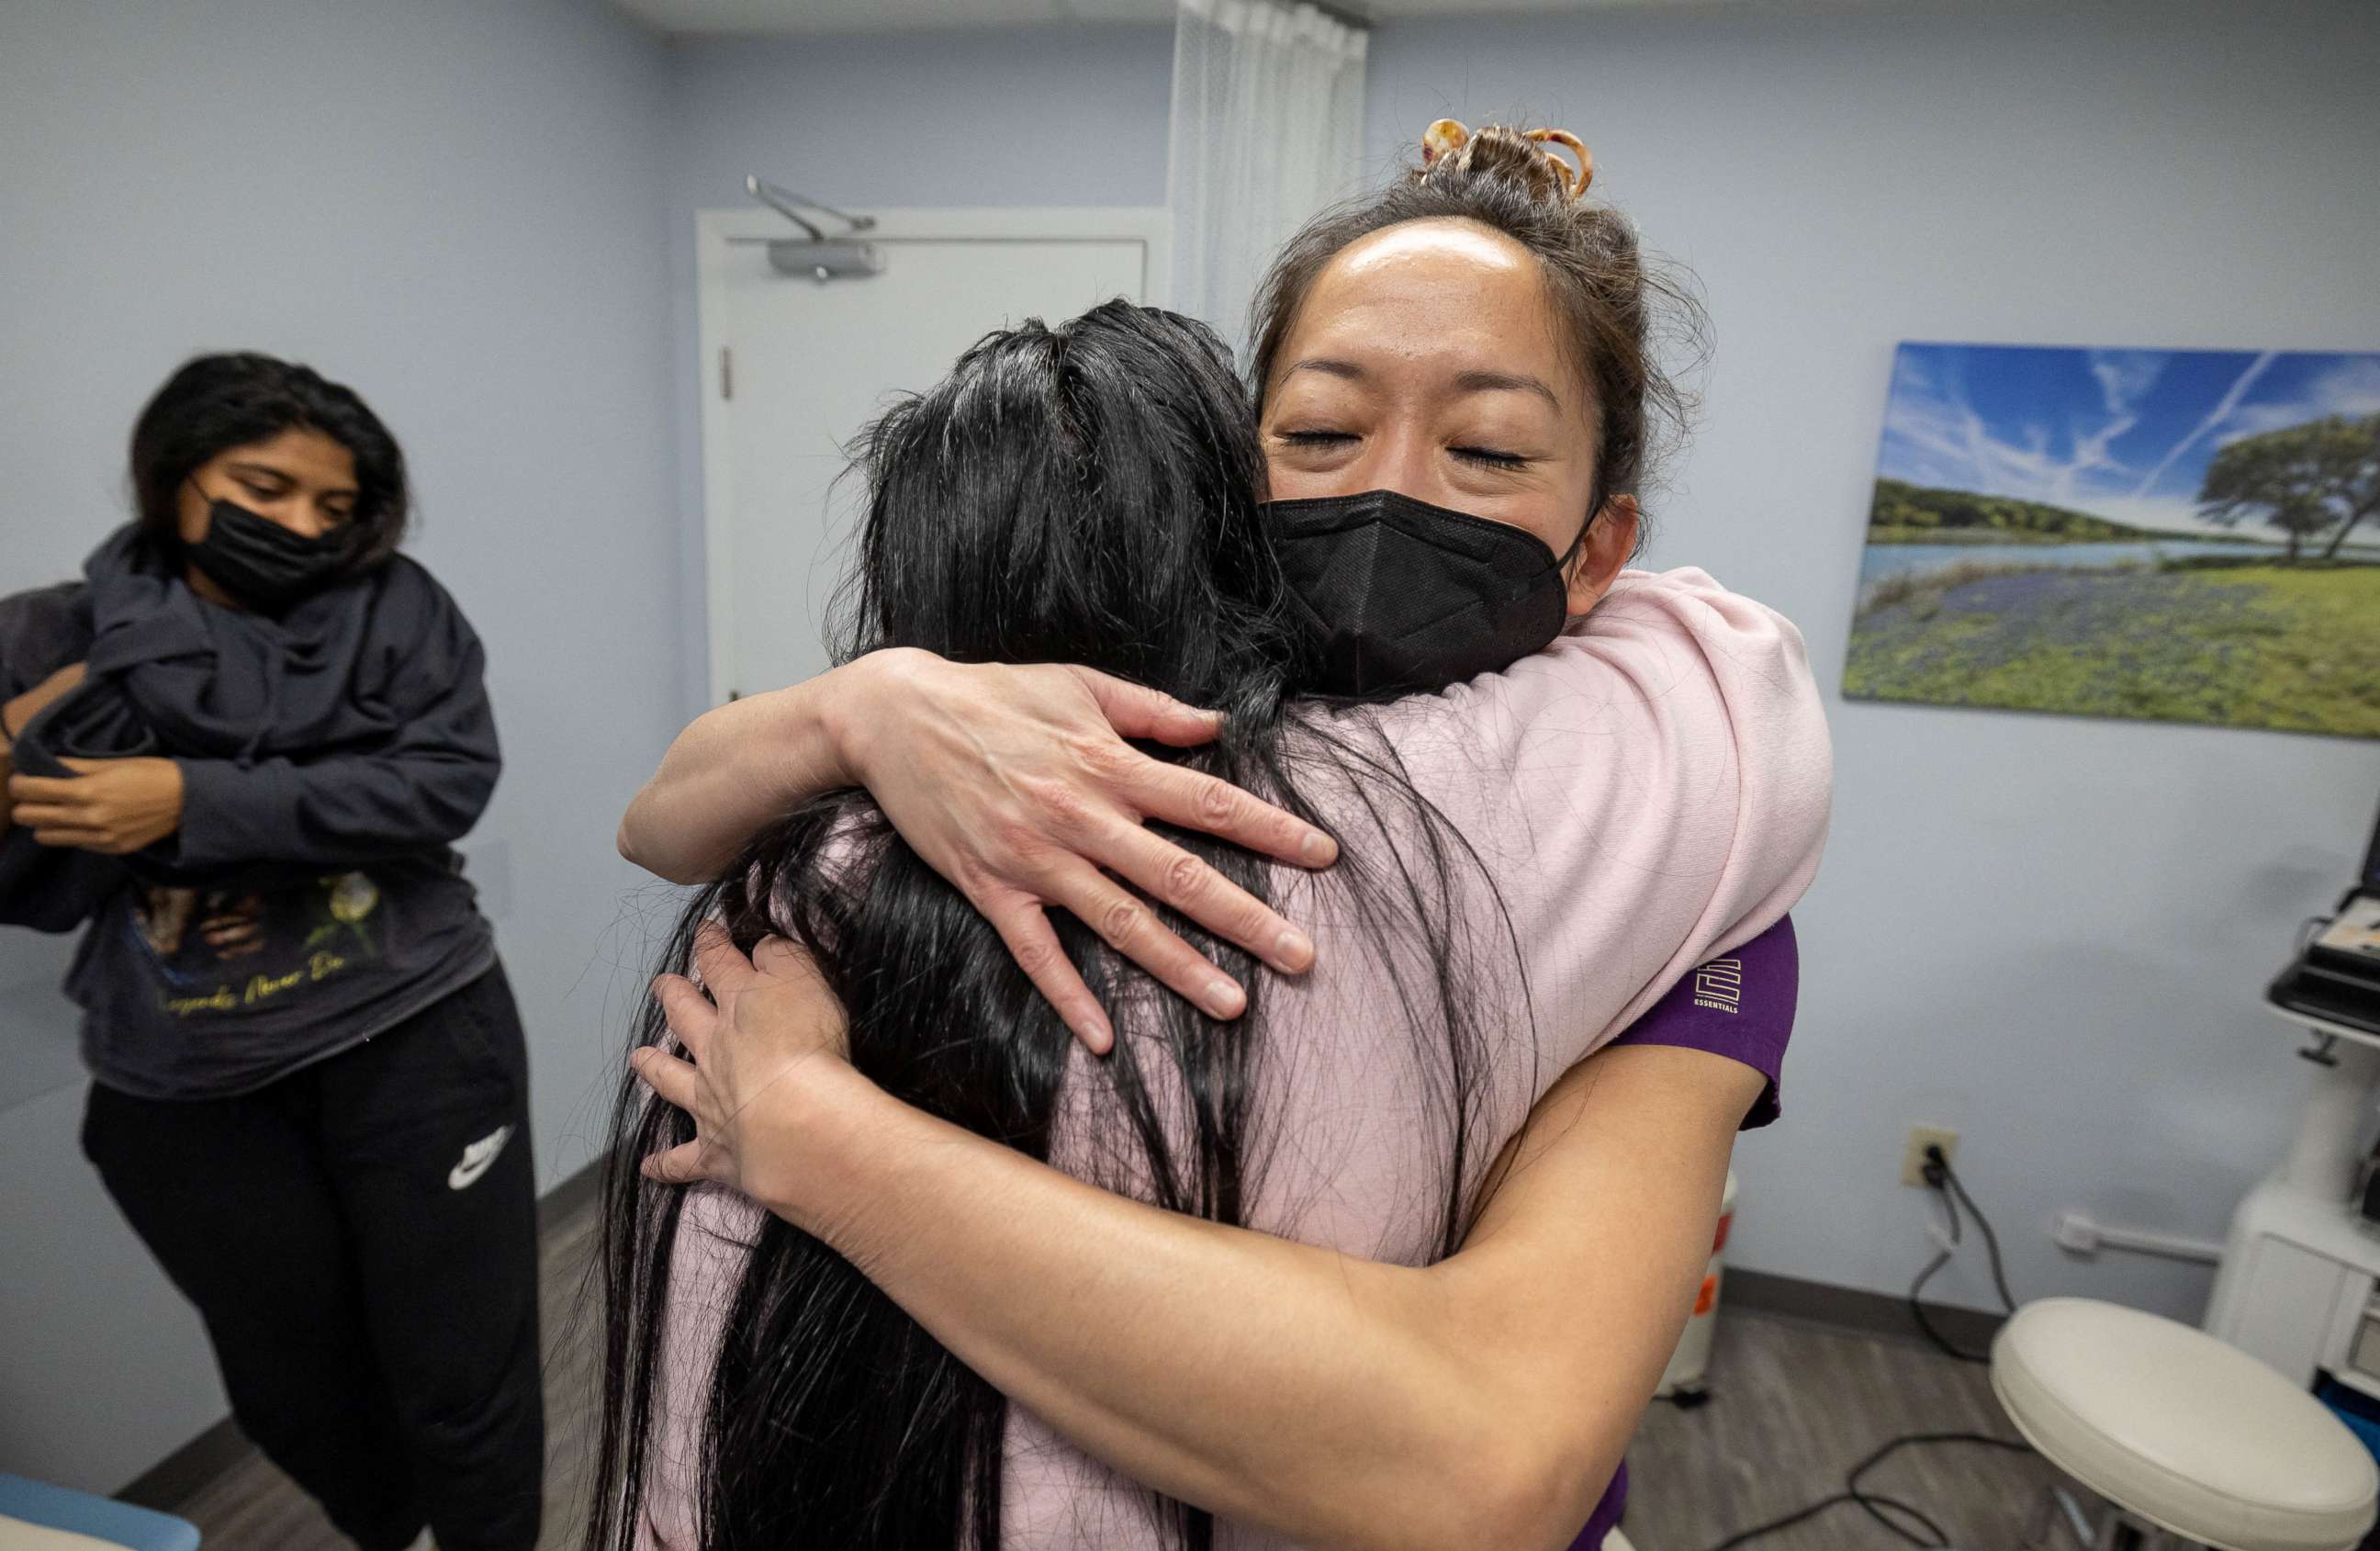 PHOTO: OC, the older sister of pregnant MC, 24, hugs Dr. Shelly Tien, 40, in gratitude, following her sister's appointment at Planned Parenthood in Jacksonville, Florida, March 15, 2022.